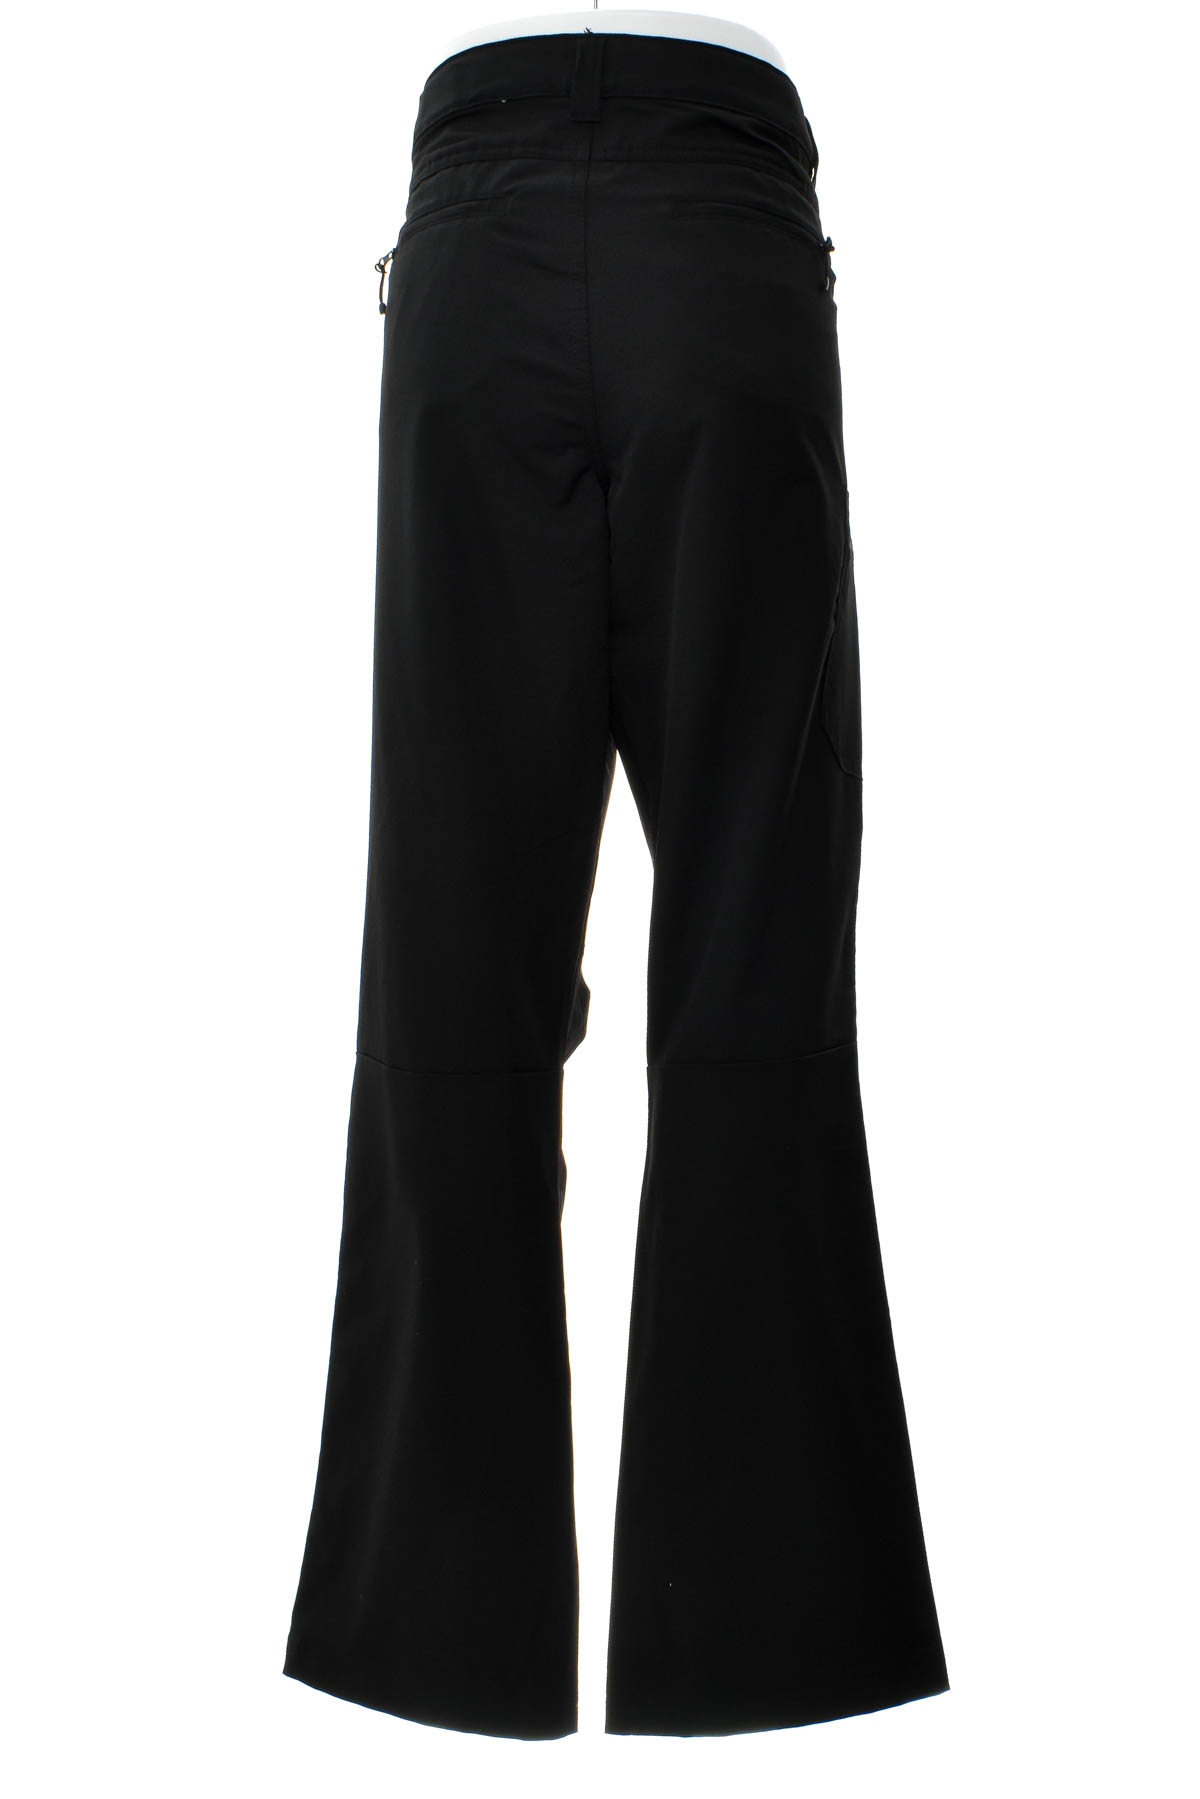 Men's trousers - Out Living - 1